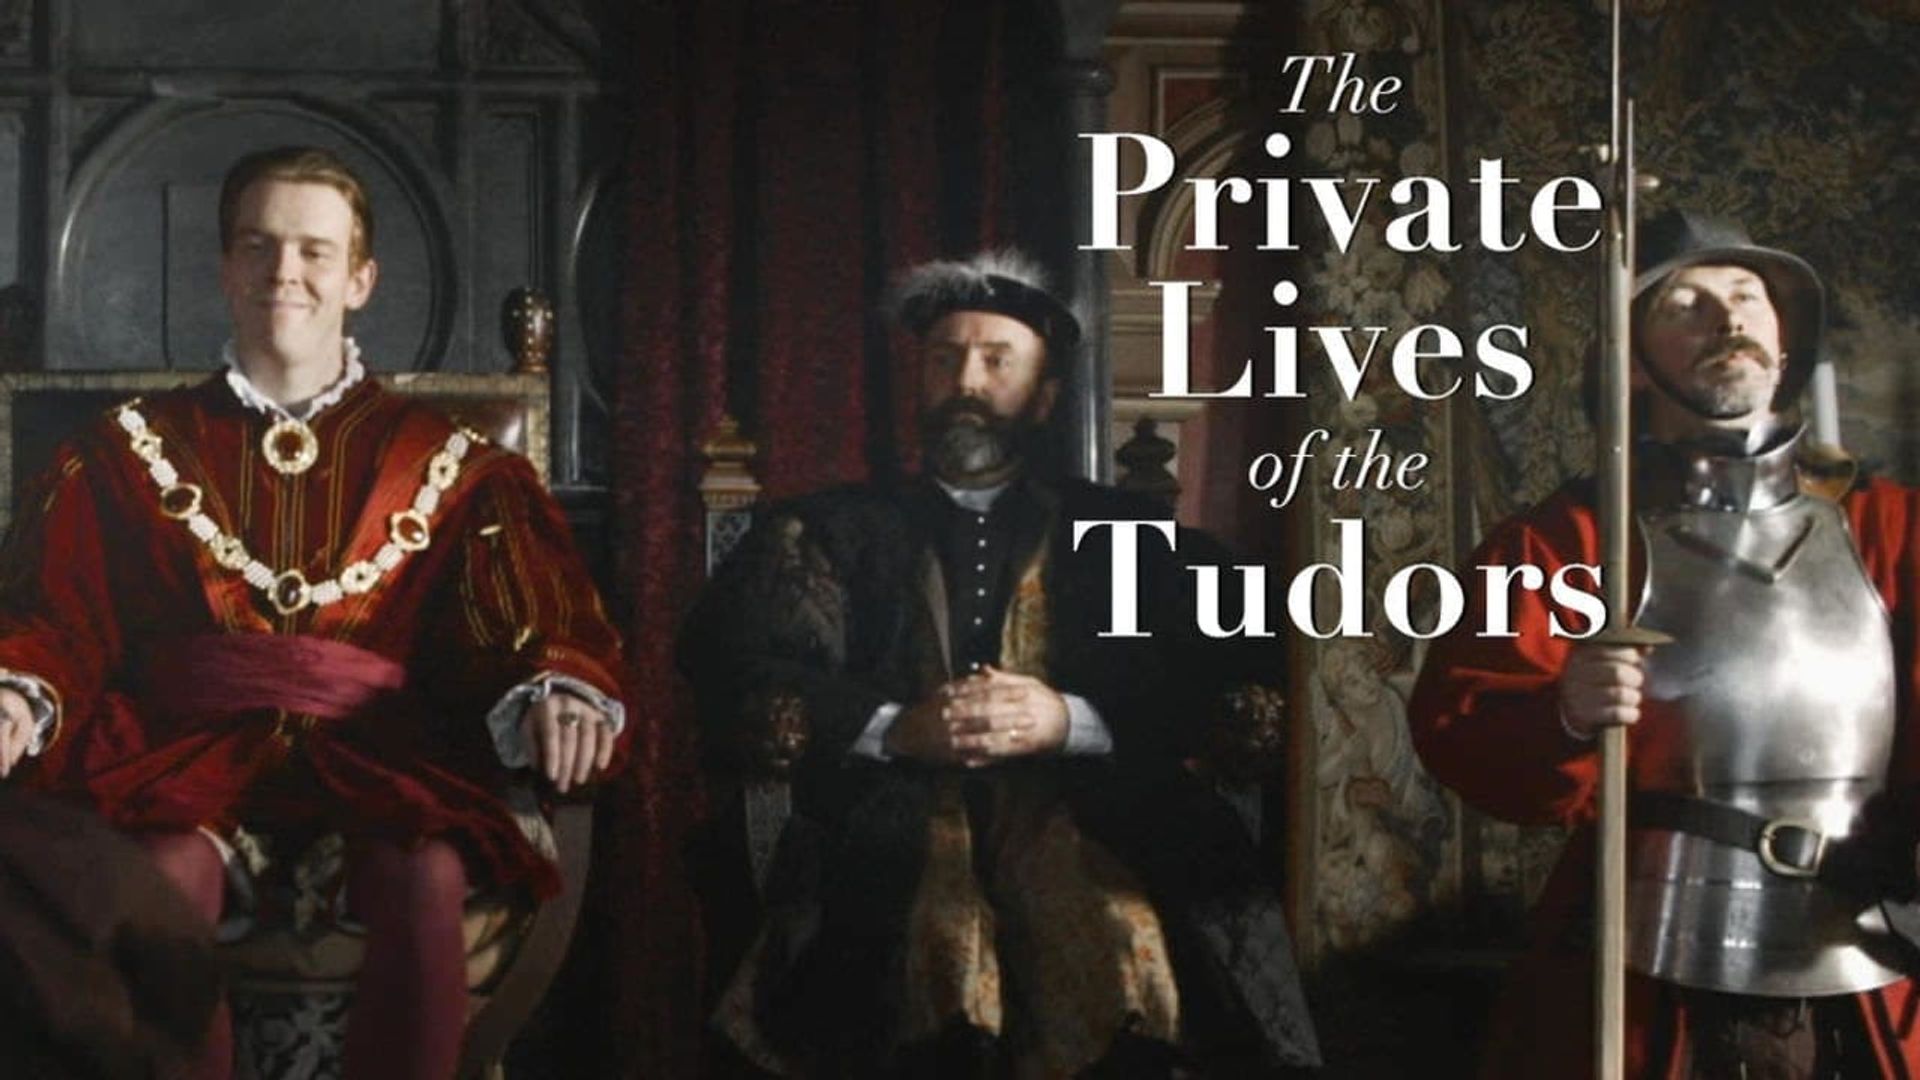 The Private Lives of the Tudors background